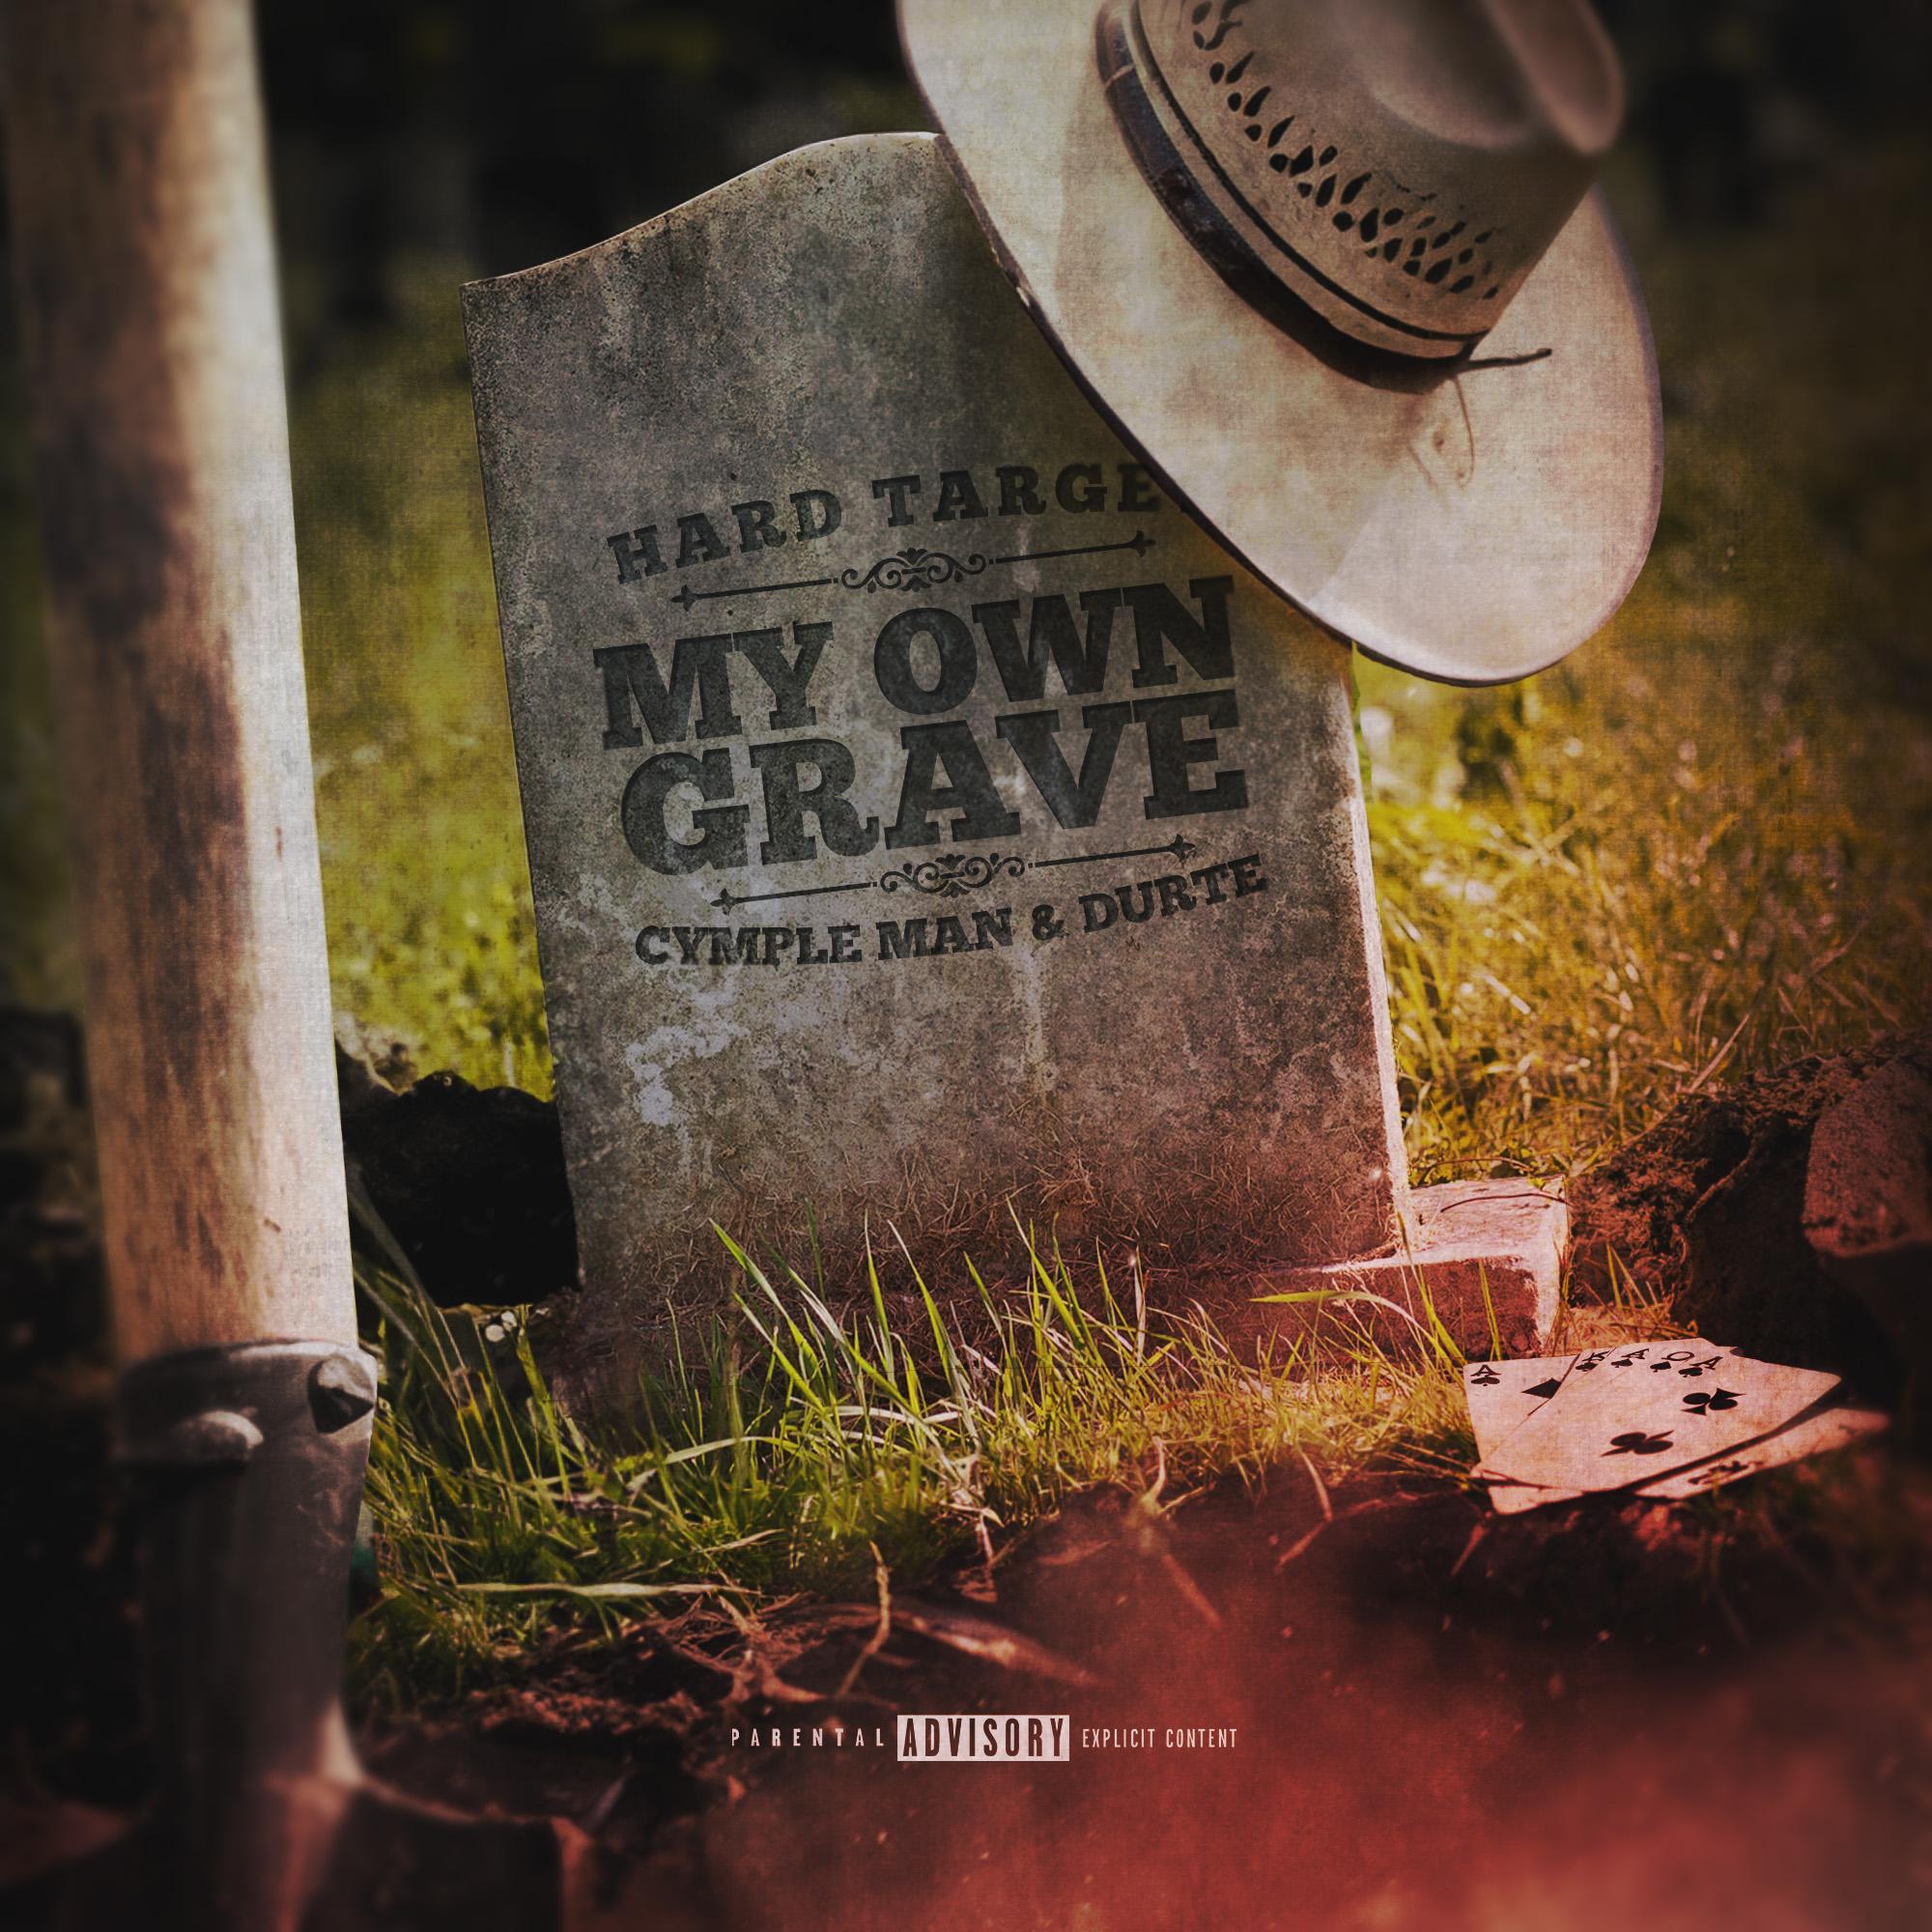 Hard Target - My Own Grave